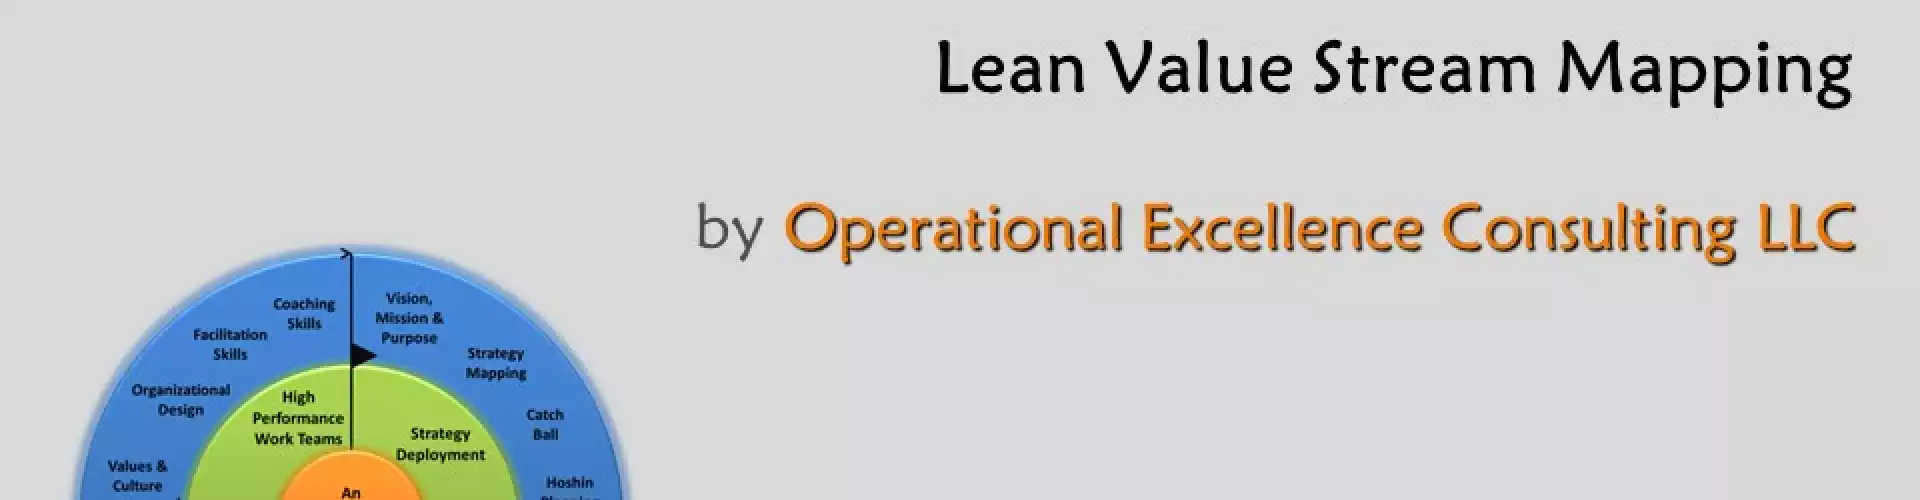 Lean Value Stream Mapping